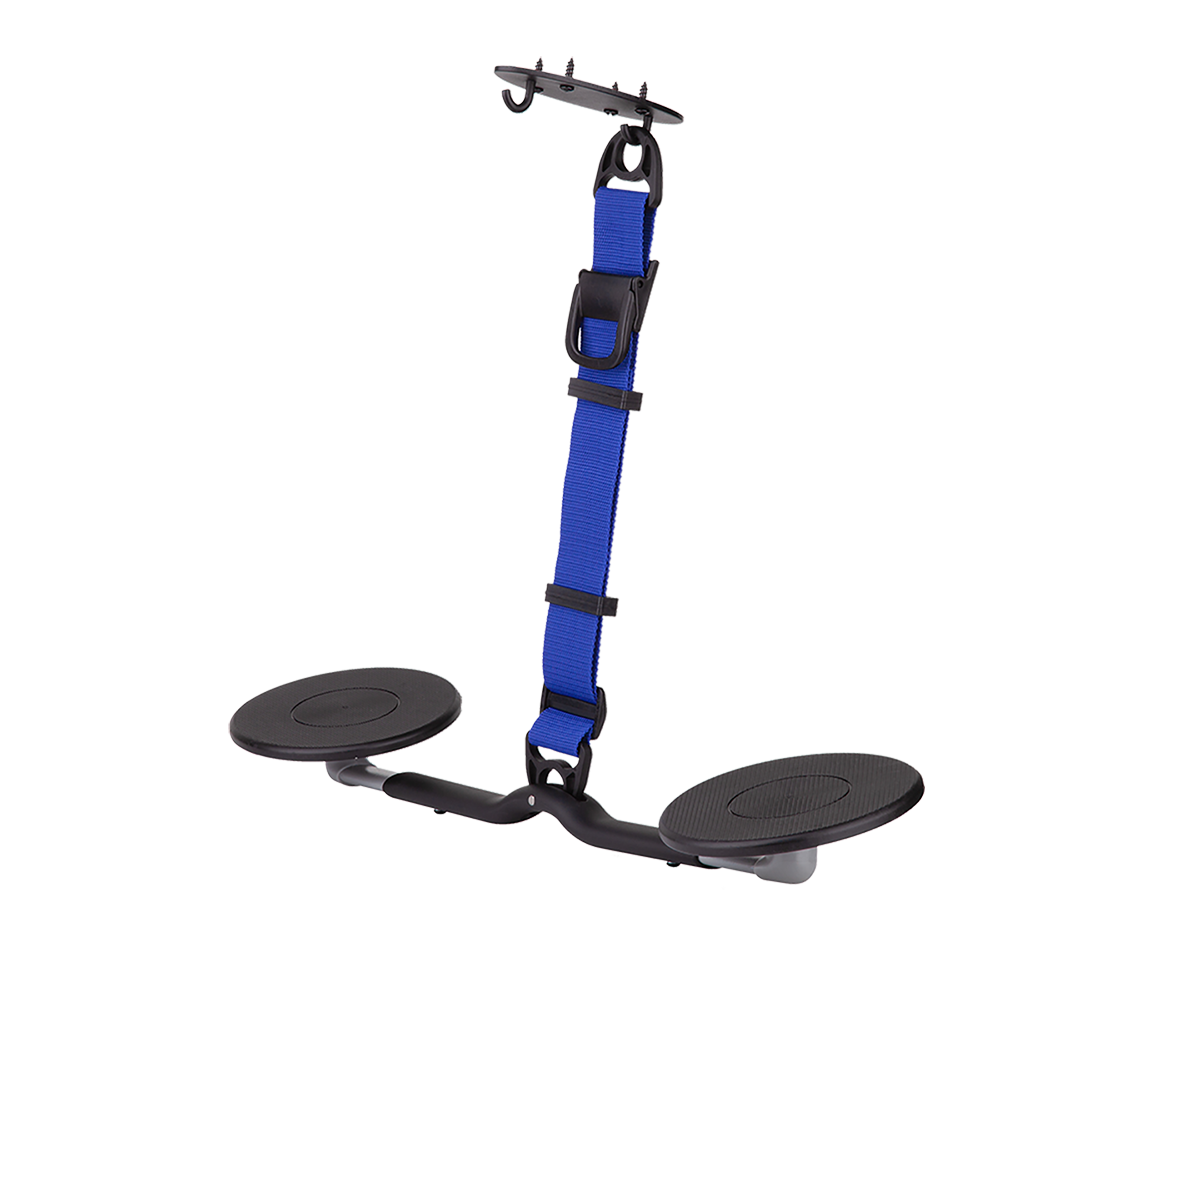 https://hovrpro.com/s/files/1/2474/0870/products/desk-mount-blue_2048x.png